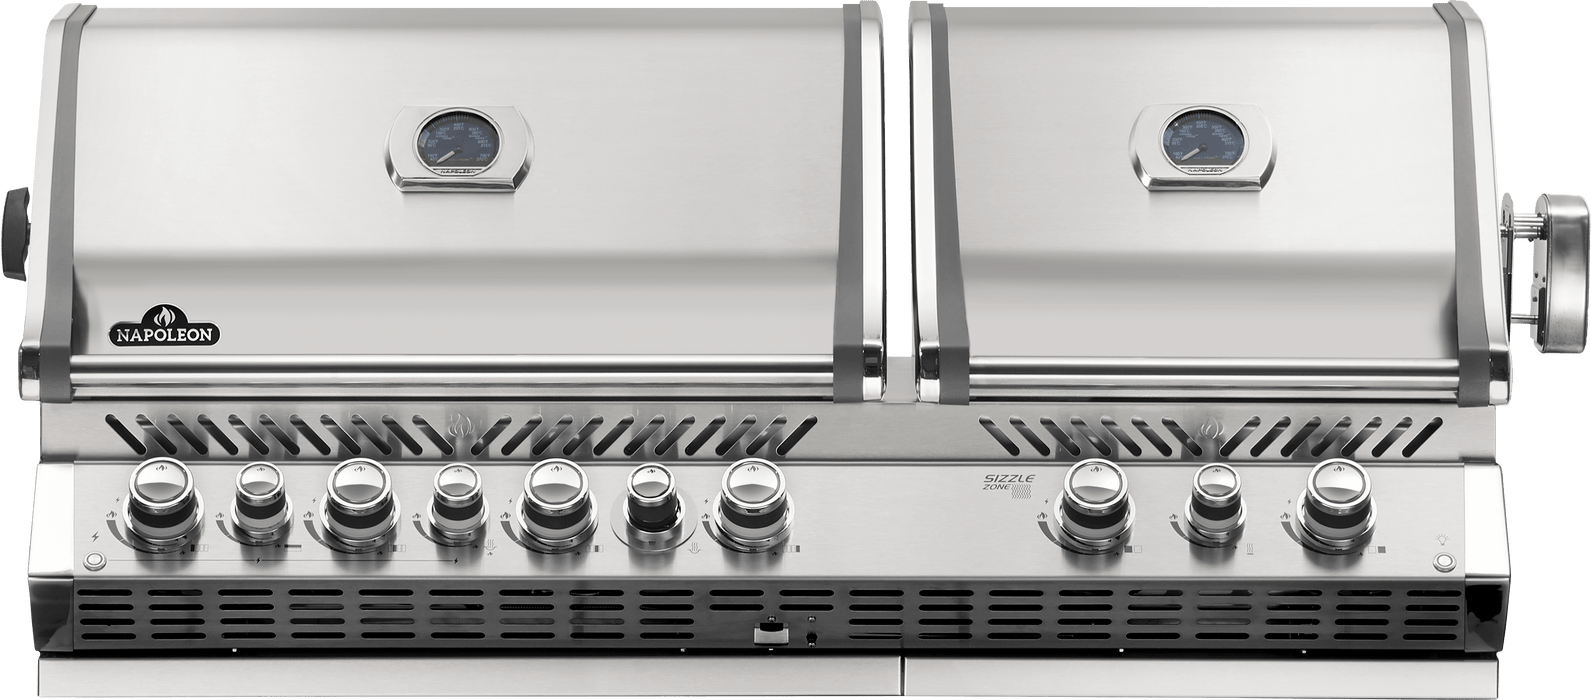 Napoleon Napoleon Prestige PRO 825 RBI Built-In Grill with Infrared Bottom & Rear Burners BIPRO825RBI-3 Built-in Gas Grill